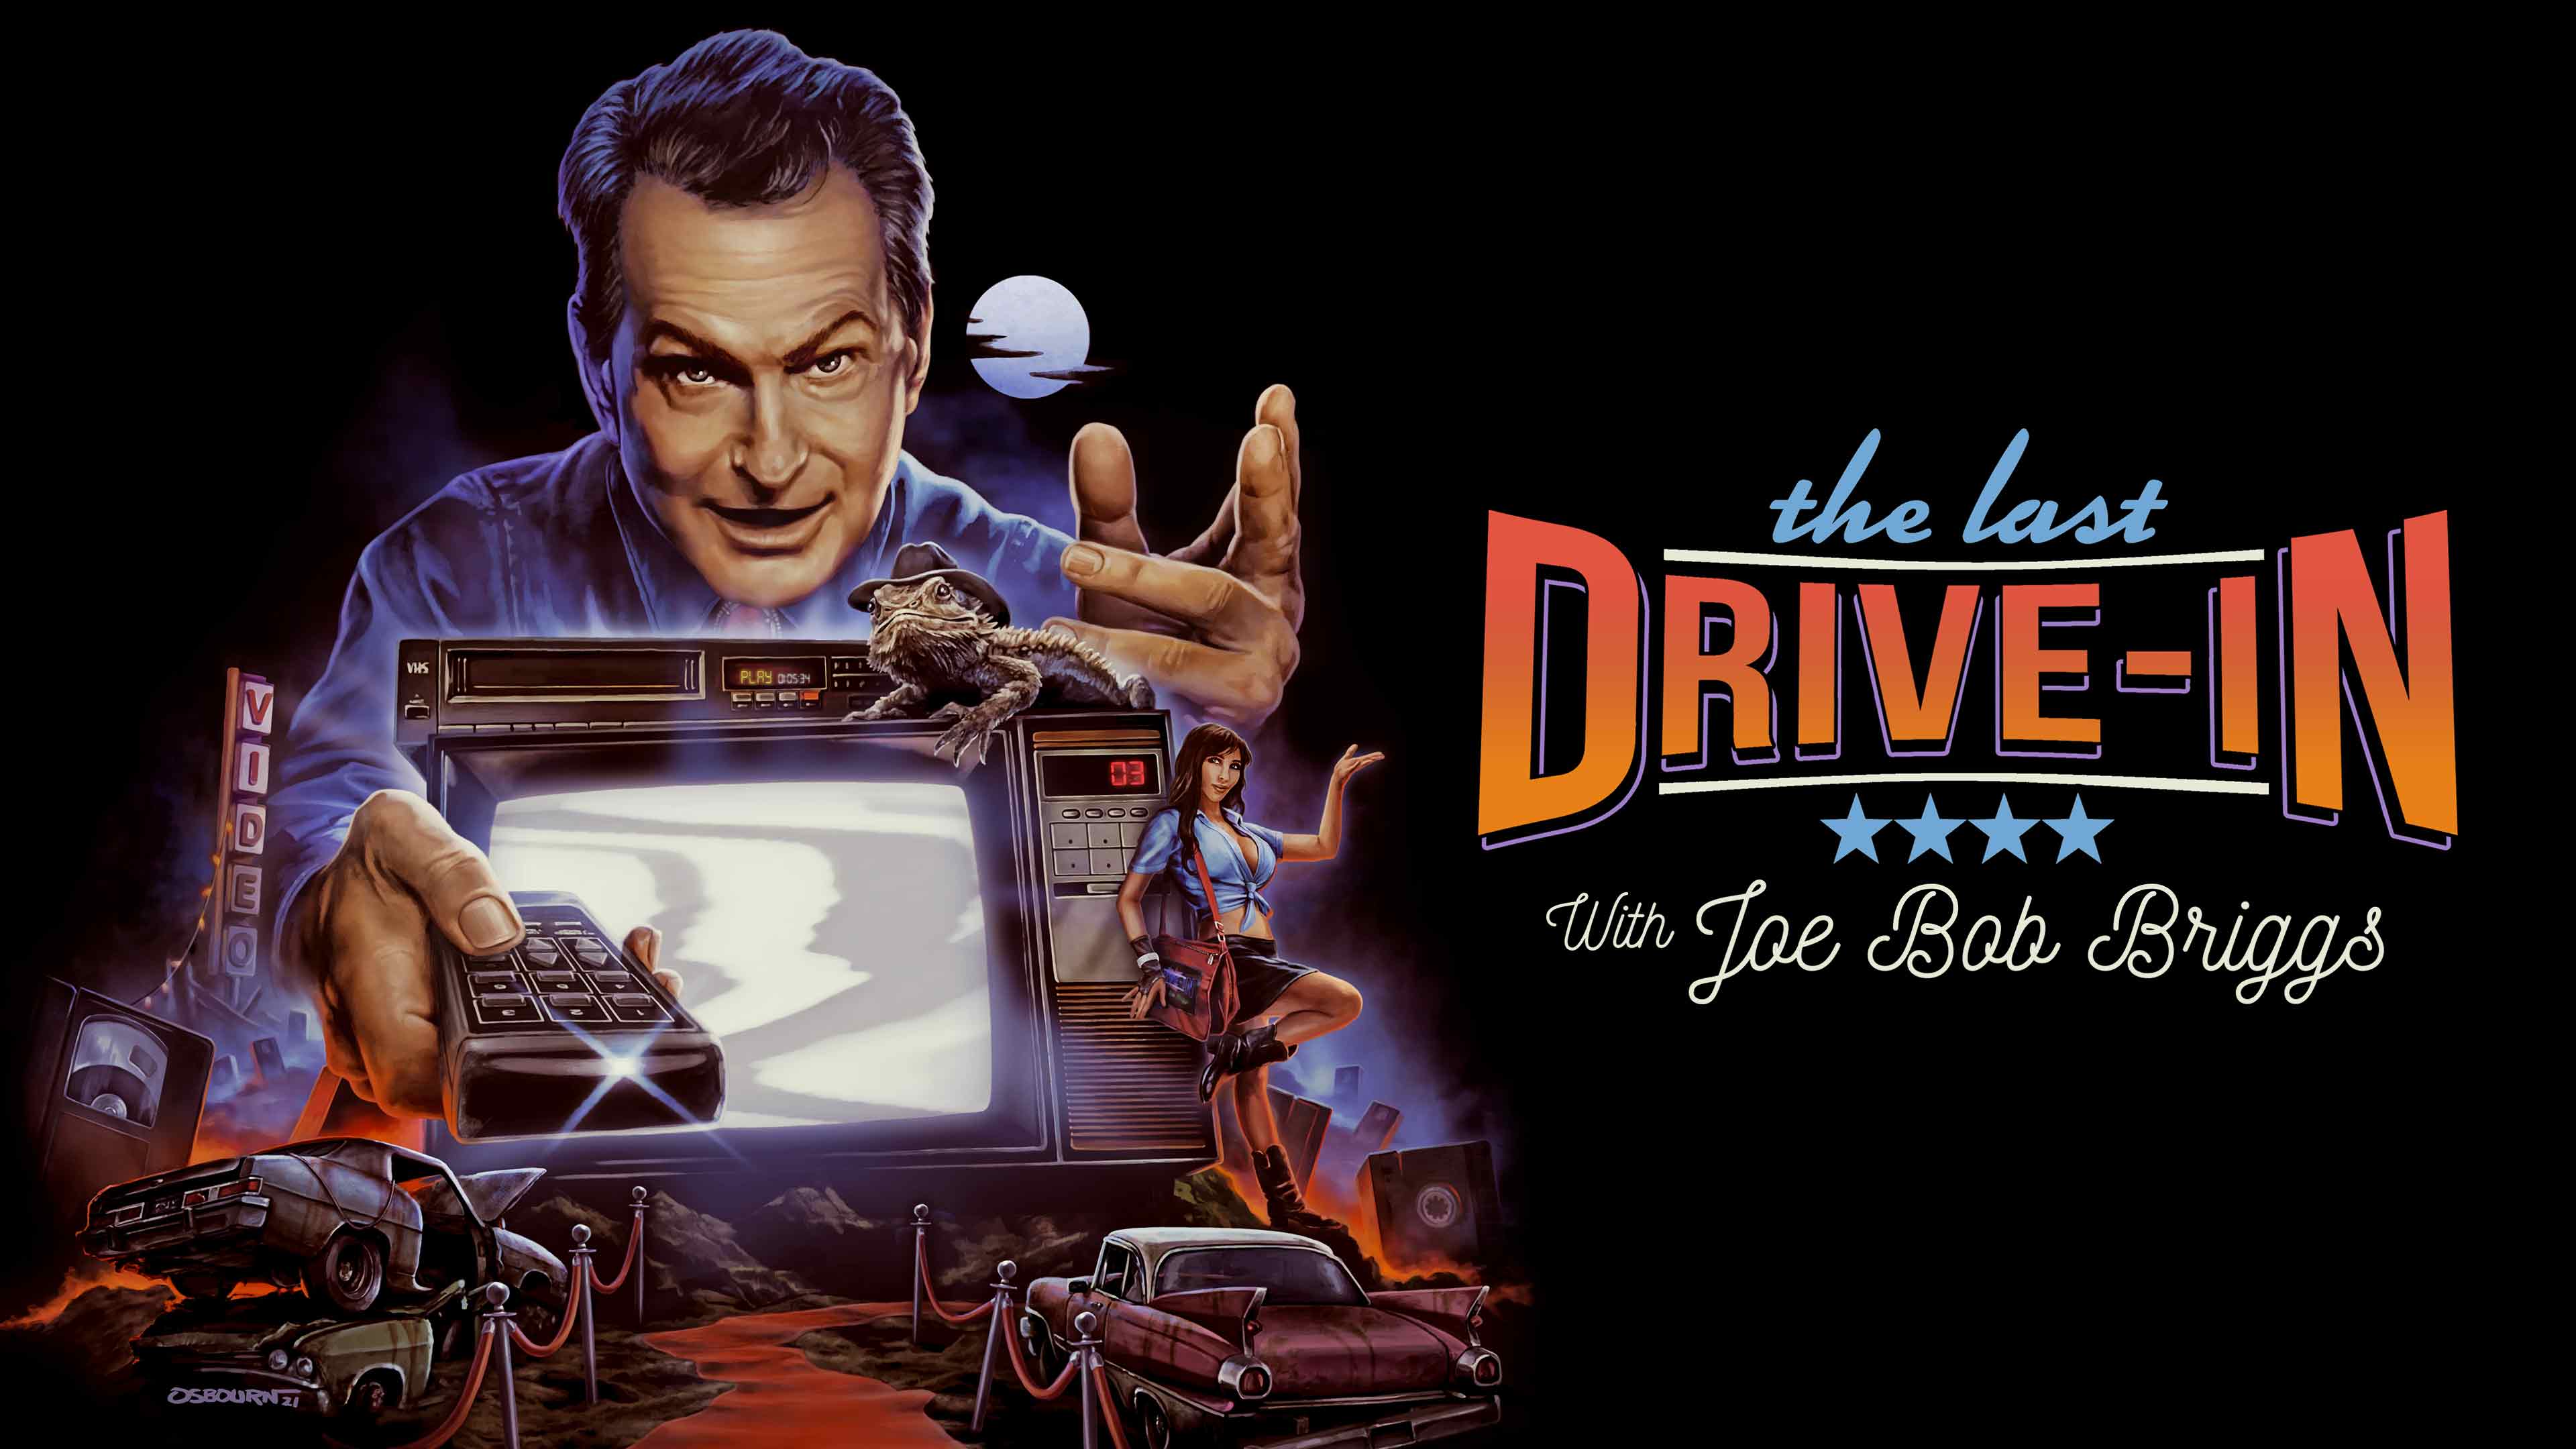 The Last Drive-In with Joe Bob Briggs Trailer, Proving once again that "the drive-in will never die," iconic horror host and exploitation movie aficionado Joe Bob Briggs is back with an all-new Shudder Original series, hosting weekly Friday night double features streaming live exclusively on Shudder